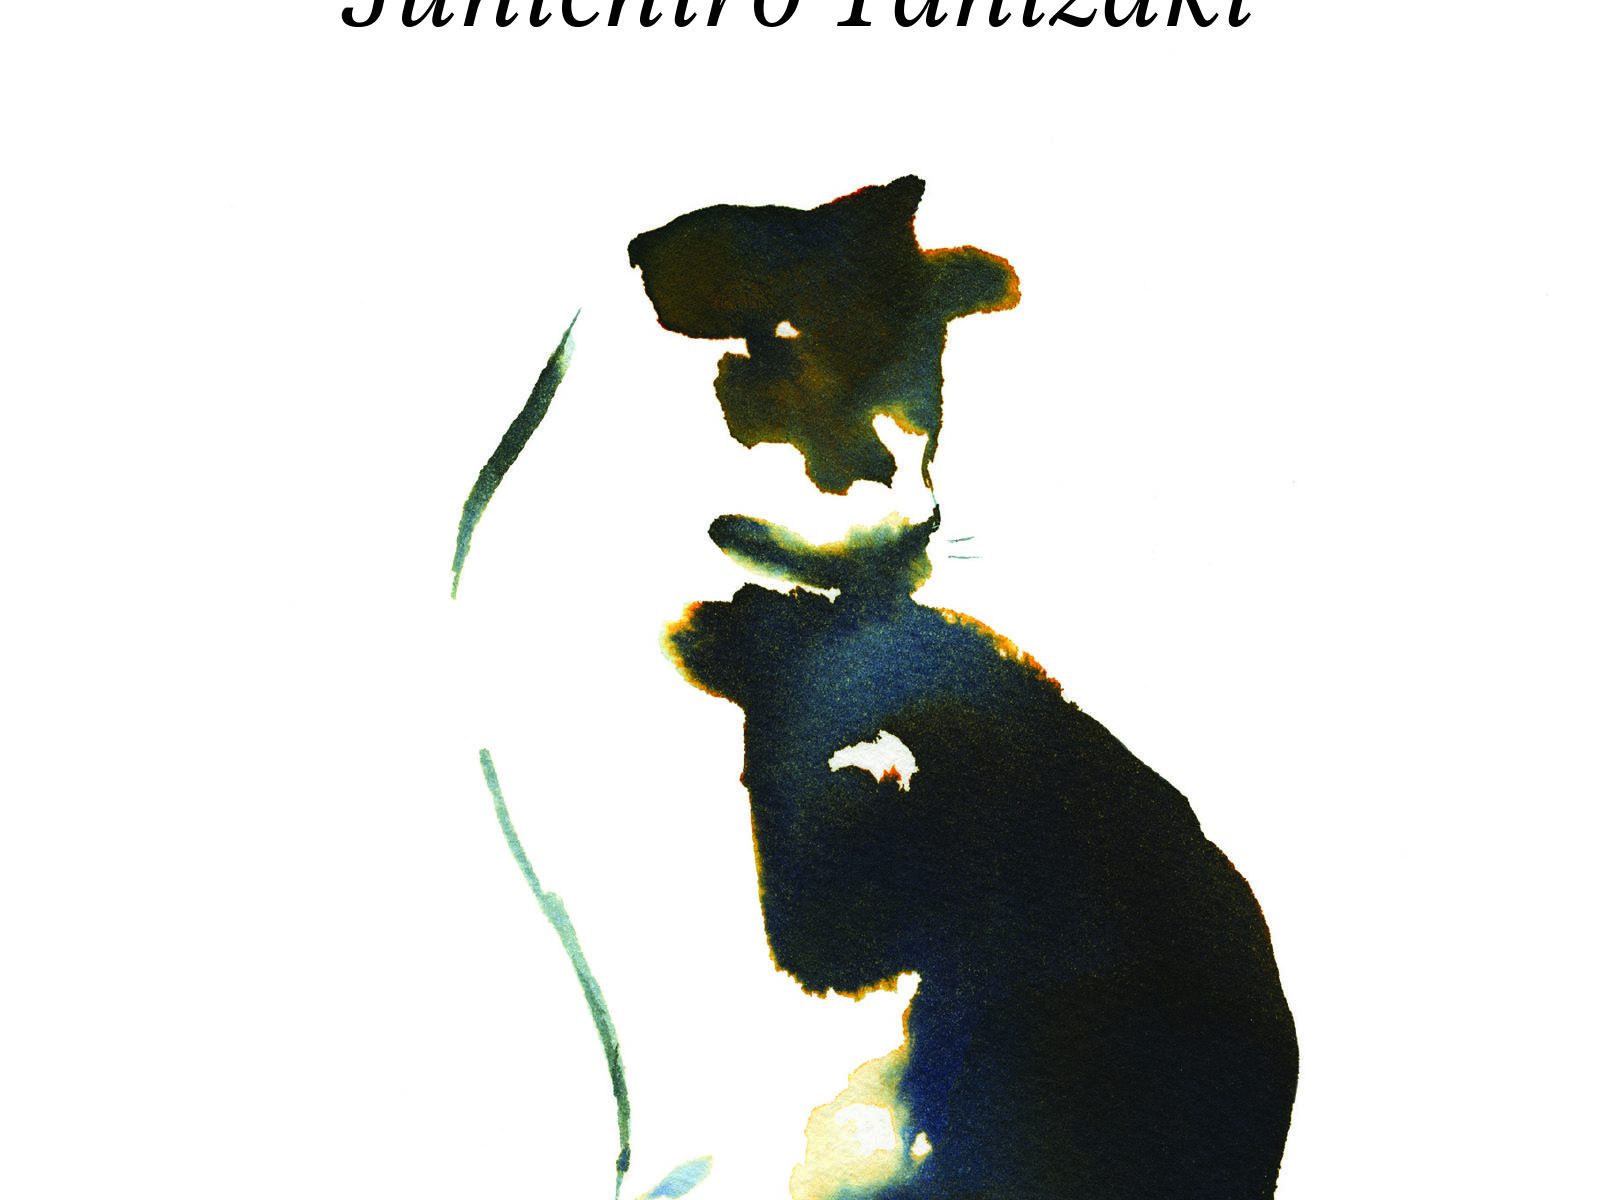 A Cat, a Man and Two Women By Jun'ichiro Tanizaki Translated by Paul McCarthy, book cover.